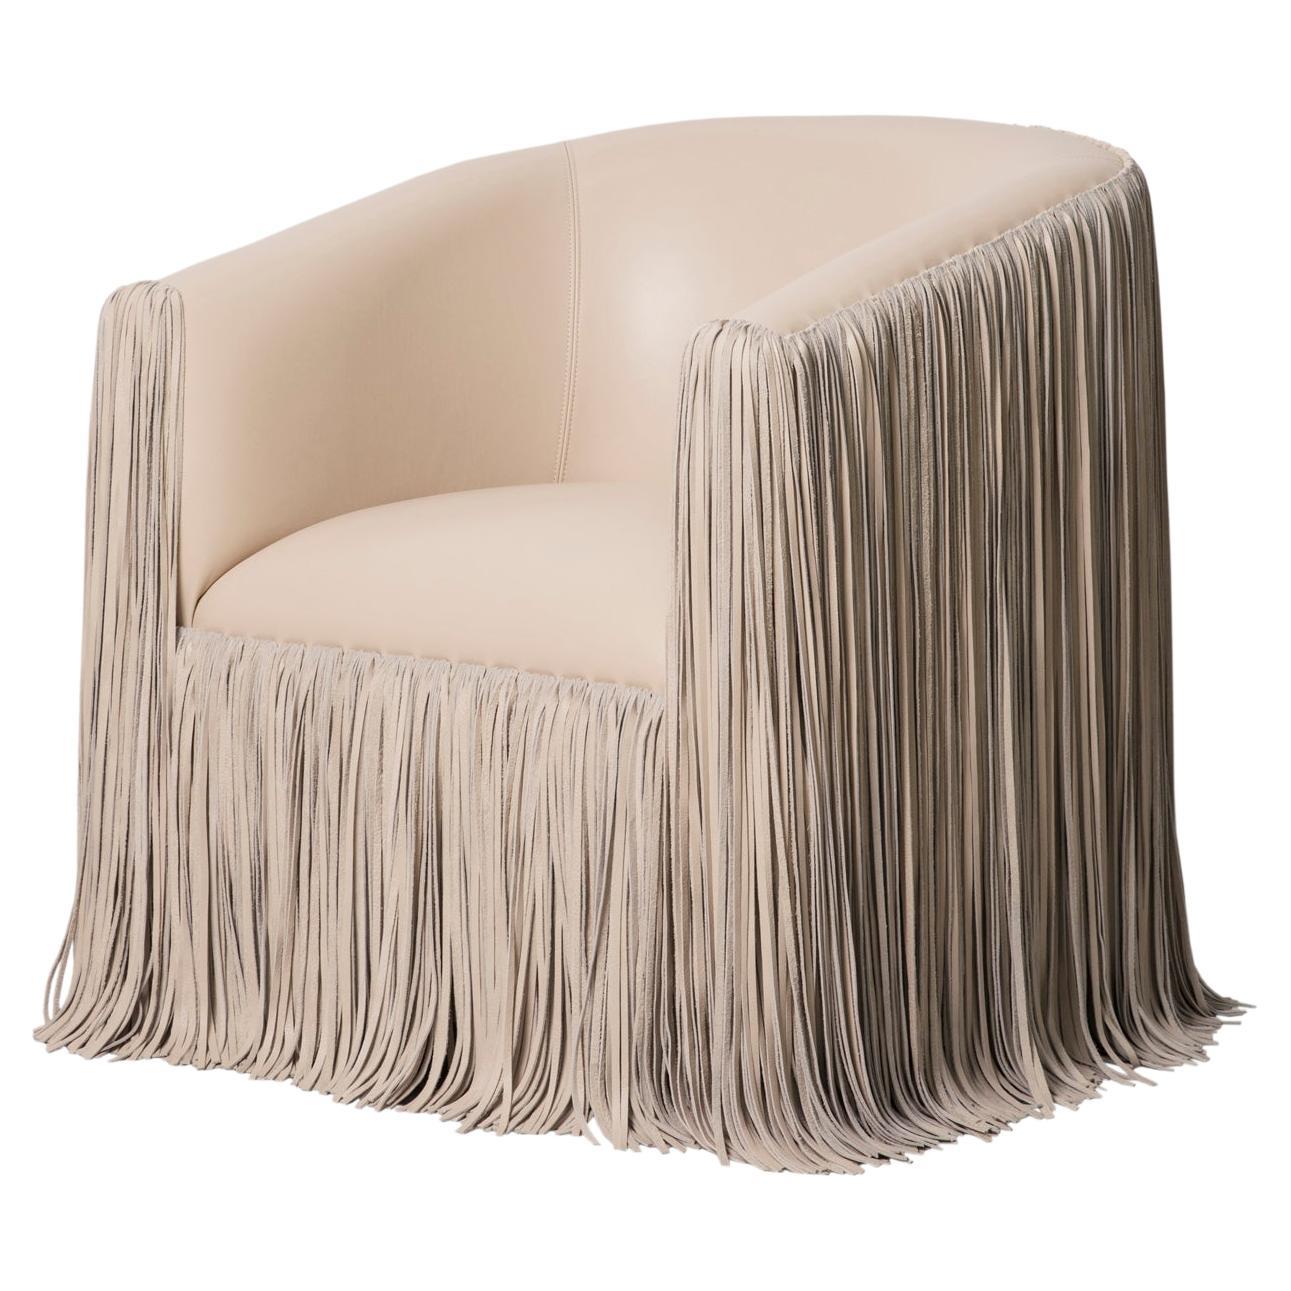 Chair - Shaggy Leather Swivel in Cream-Stone For Sale